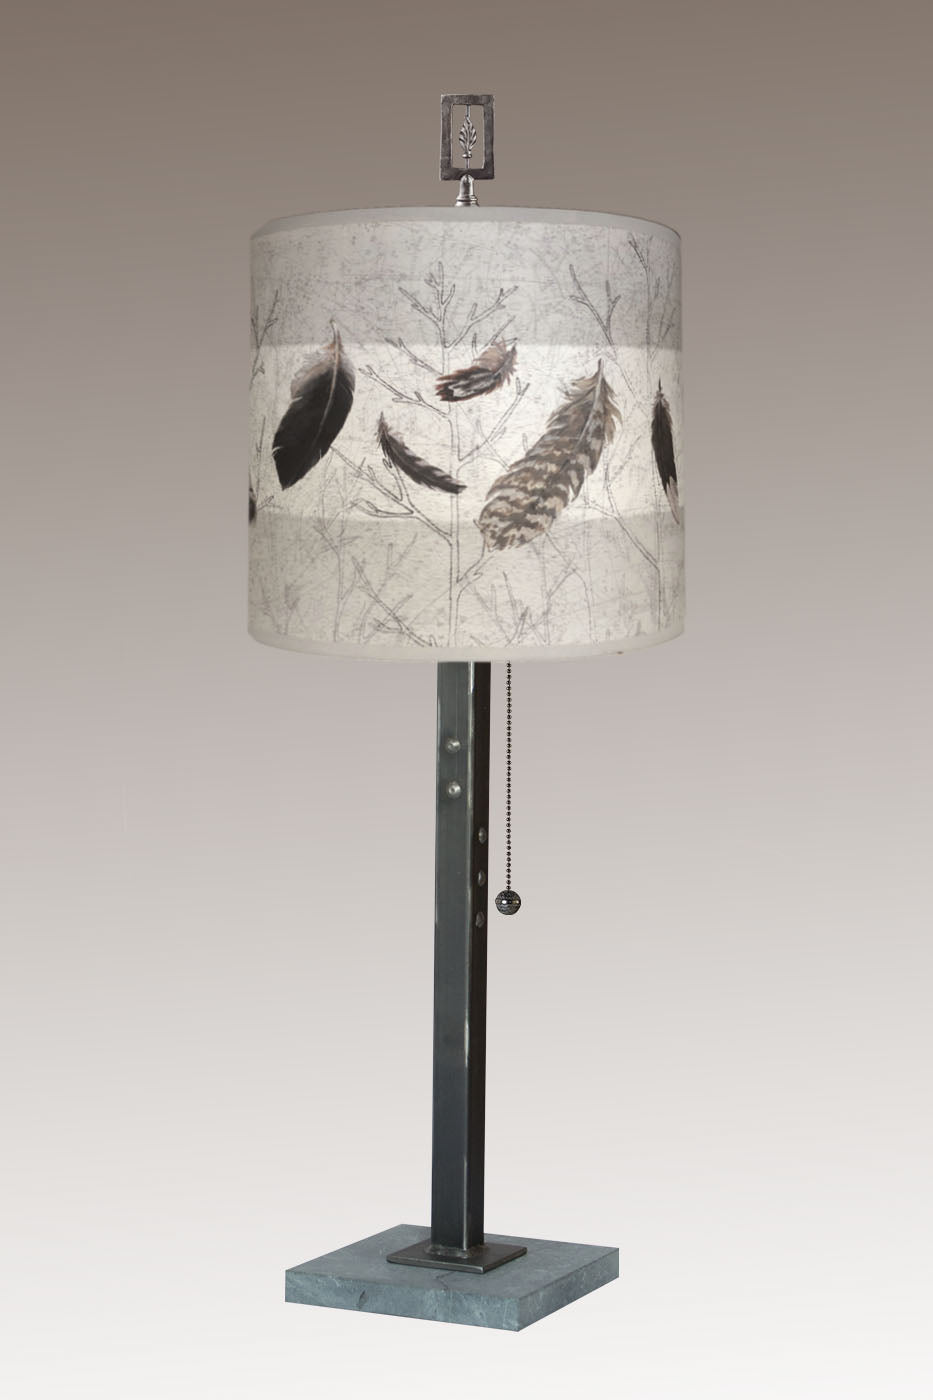 Janna Ugone &amp; Co Table Lamps Steel Table Lamp with Medium Drum Shade in Feathers in Pebble